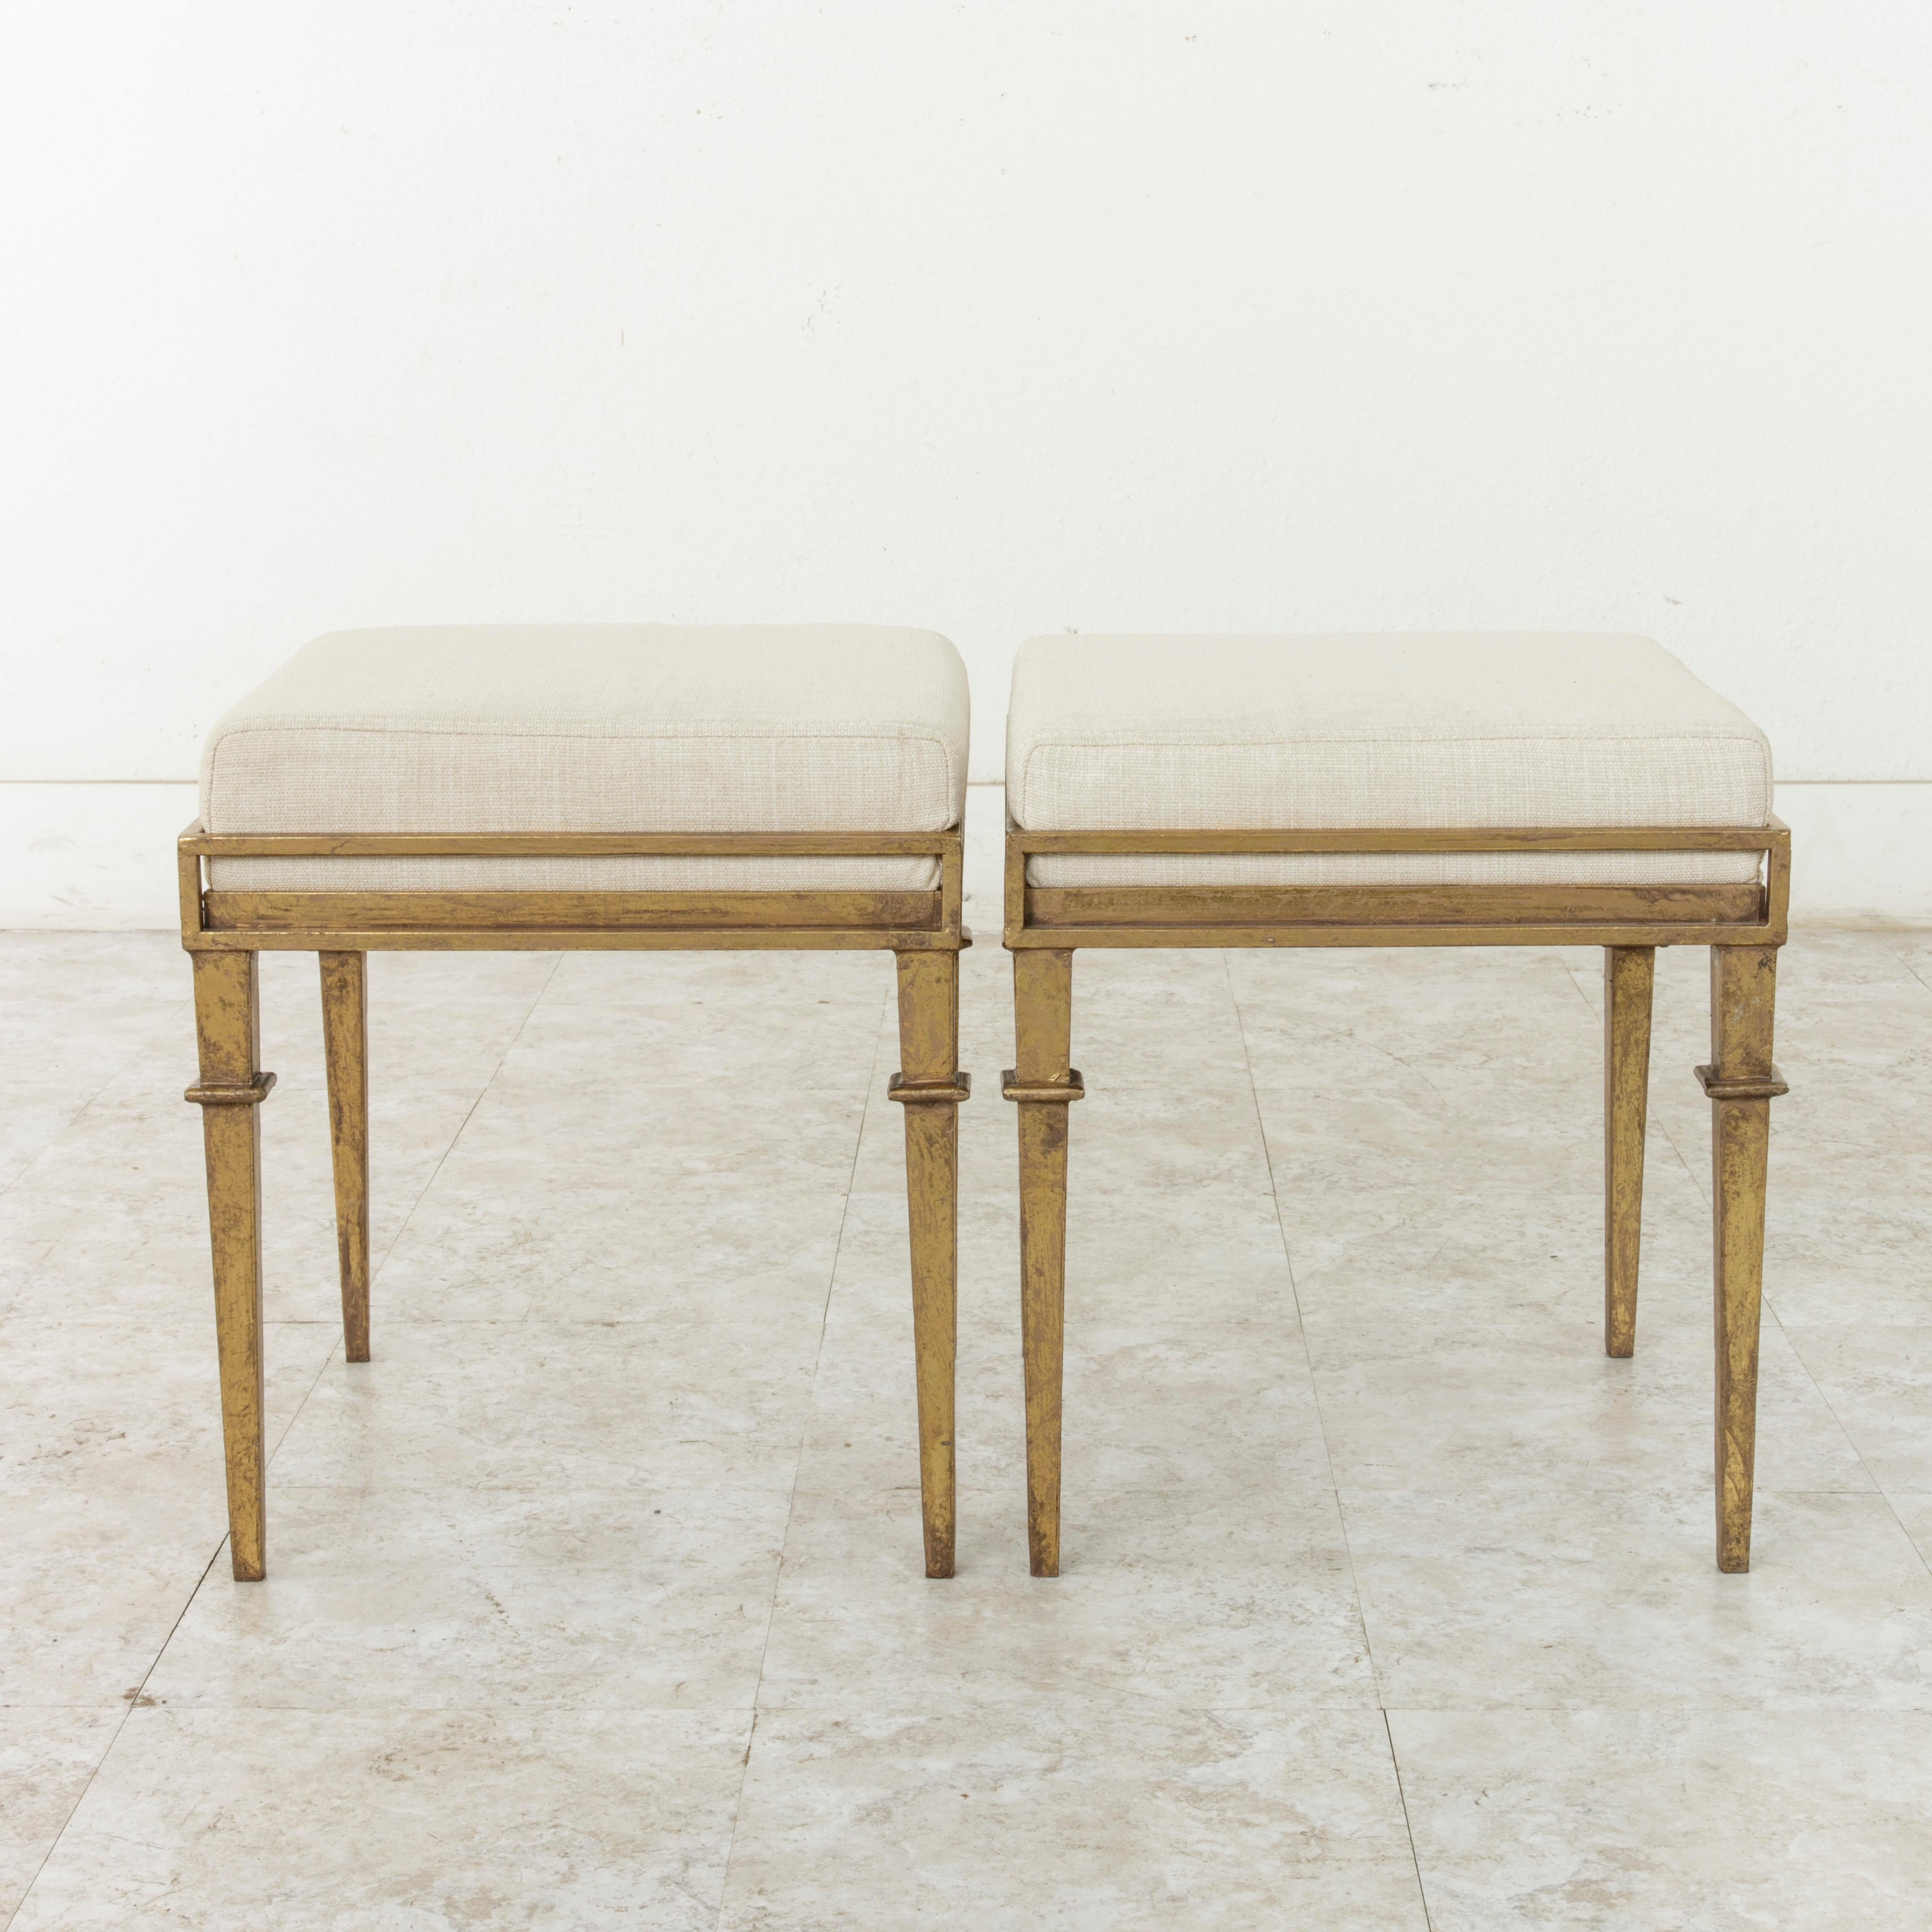 An original creation by a contemporary French designer, this pair of gilded iron banquettes or benches features a Louis XVI inspired base with tapered square legs. Newly upholstered in France in linen. Sold as a pair.